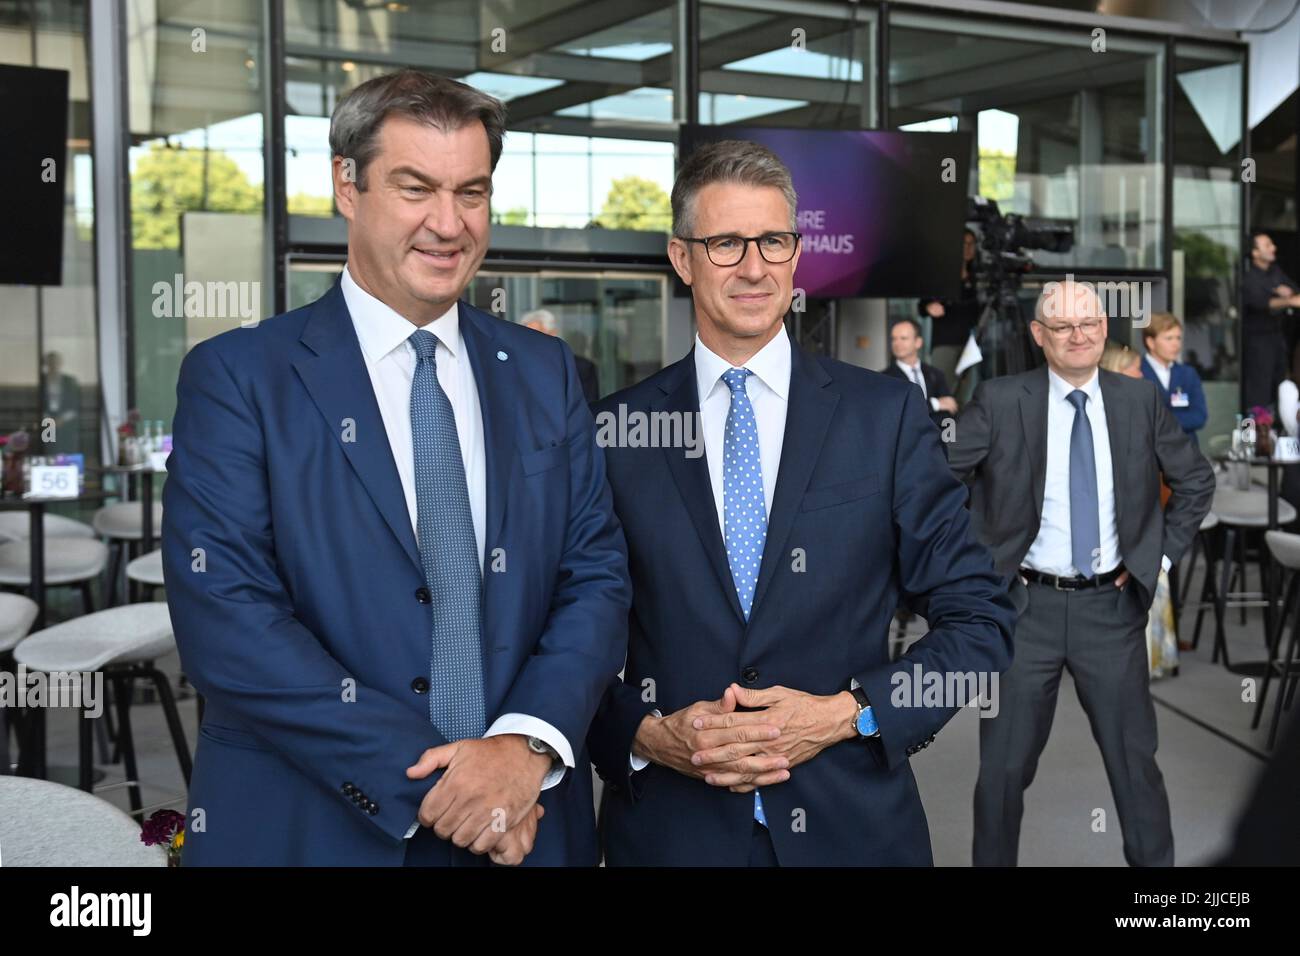 From left: Stefan QUANDT with Markus SOEDER (Prime Minister of Bavaria and  CSU Chairman). Anniversary event ?50 years BMW high-rise? on July 22nd,  2022 in Munich ?SVEN SIMON Fotoagentur GmbH & Co.